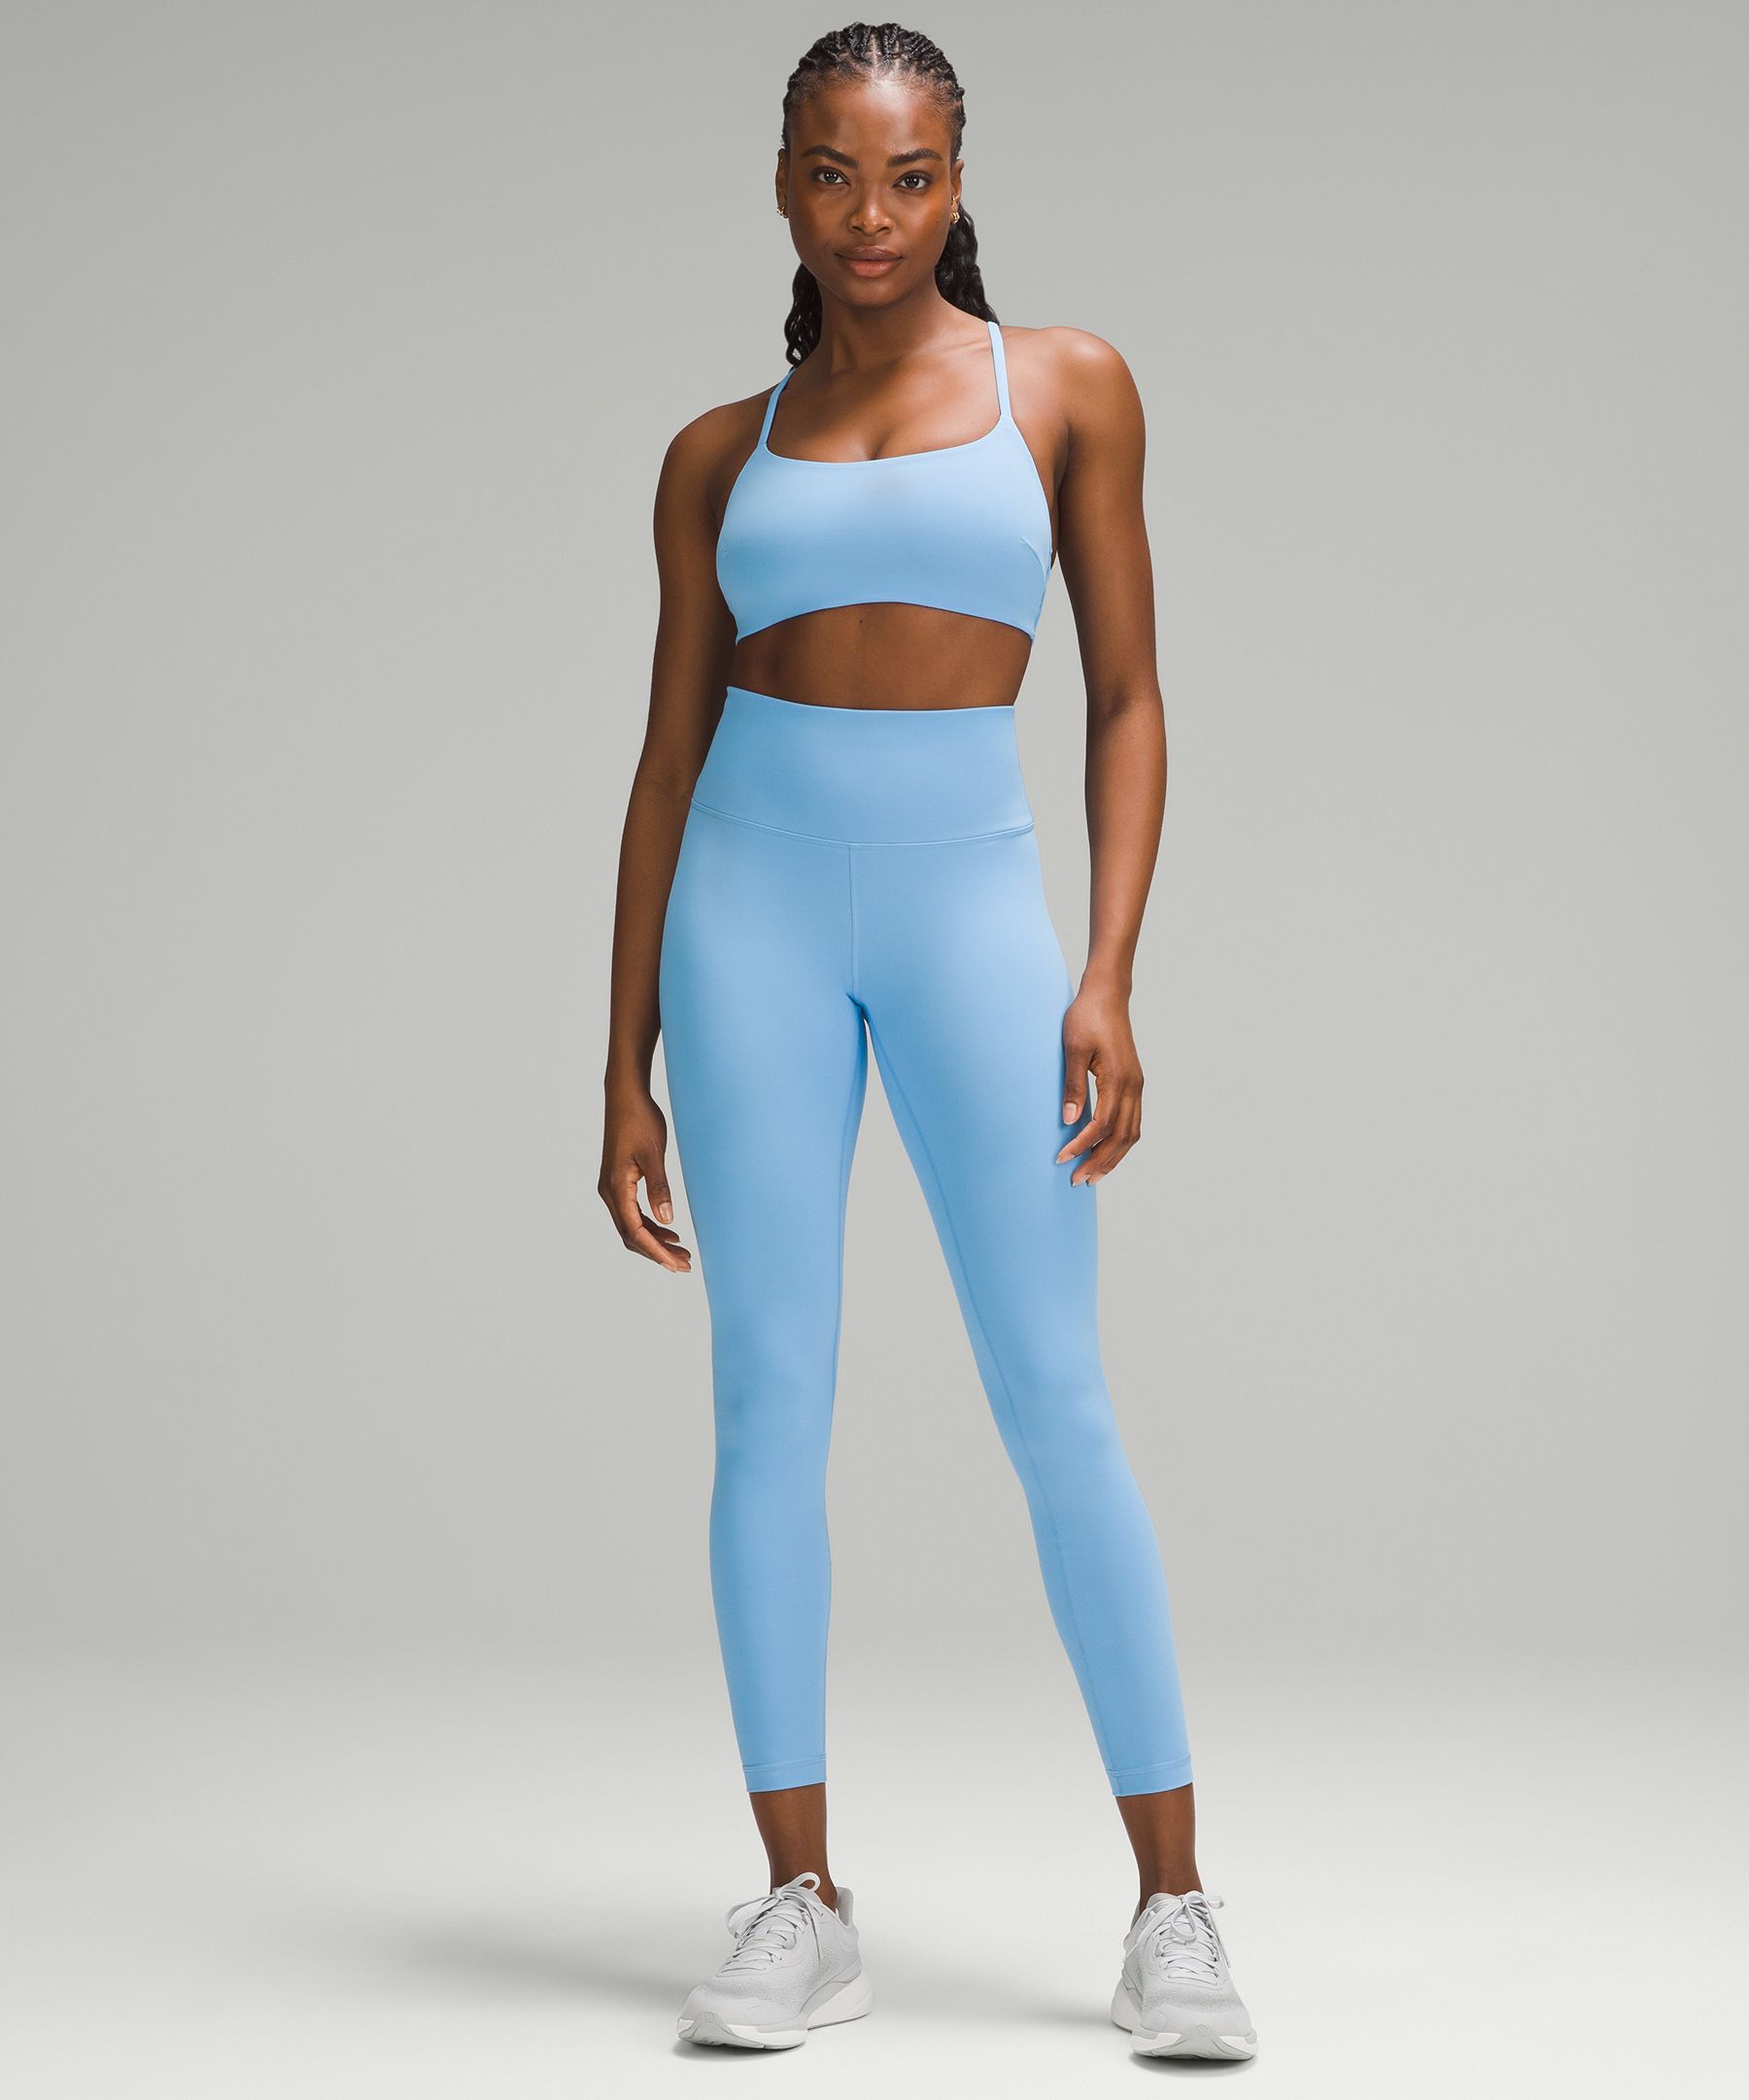 Lululemon Wunder Under Yoga Pants Super High Rise  Lululemon outfits,  Sporty outfits, Athletic outfits